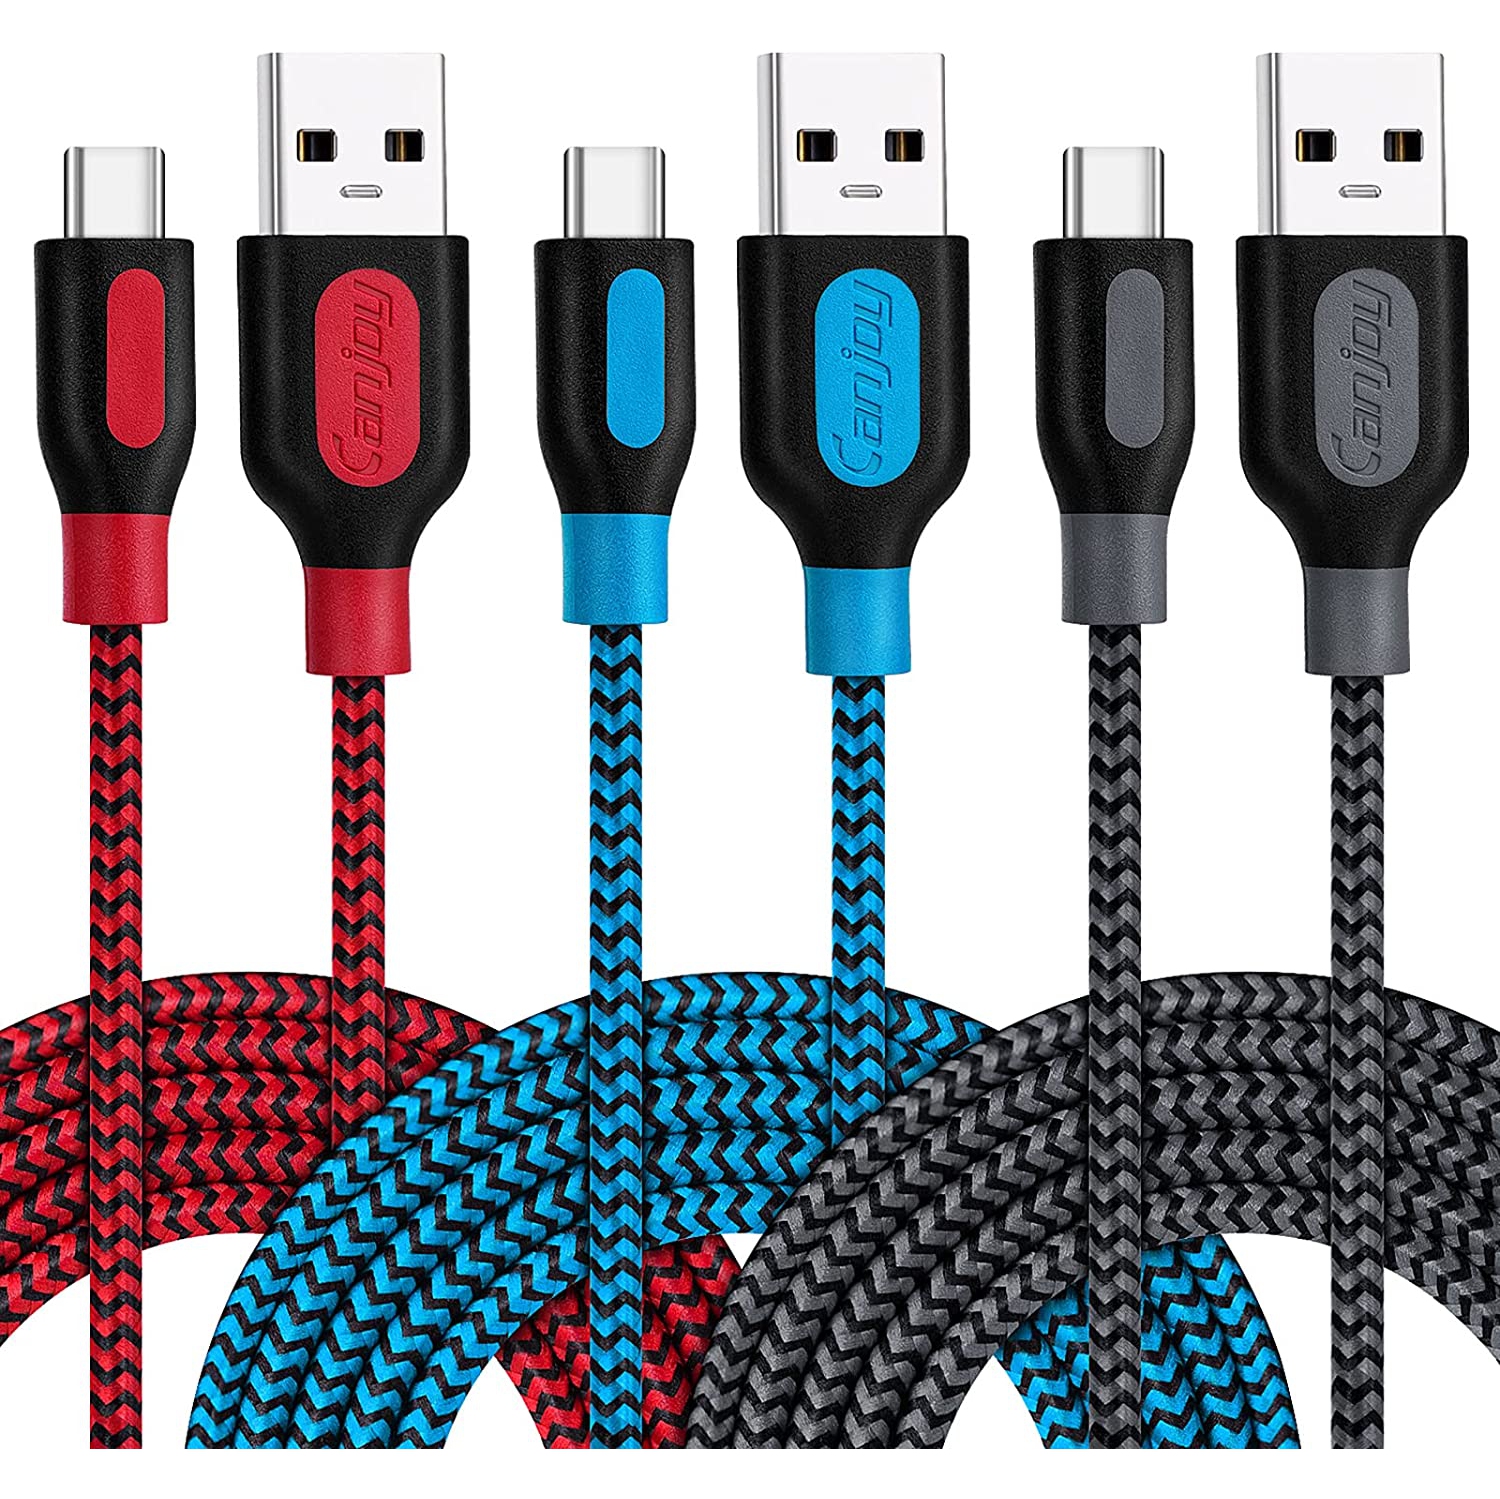 USB Type C Cable, 3 Pack 10ft Braided Type C Charger Fast Charging Cord Compatible Samsung Galaxy S10 S10+ S10e